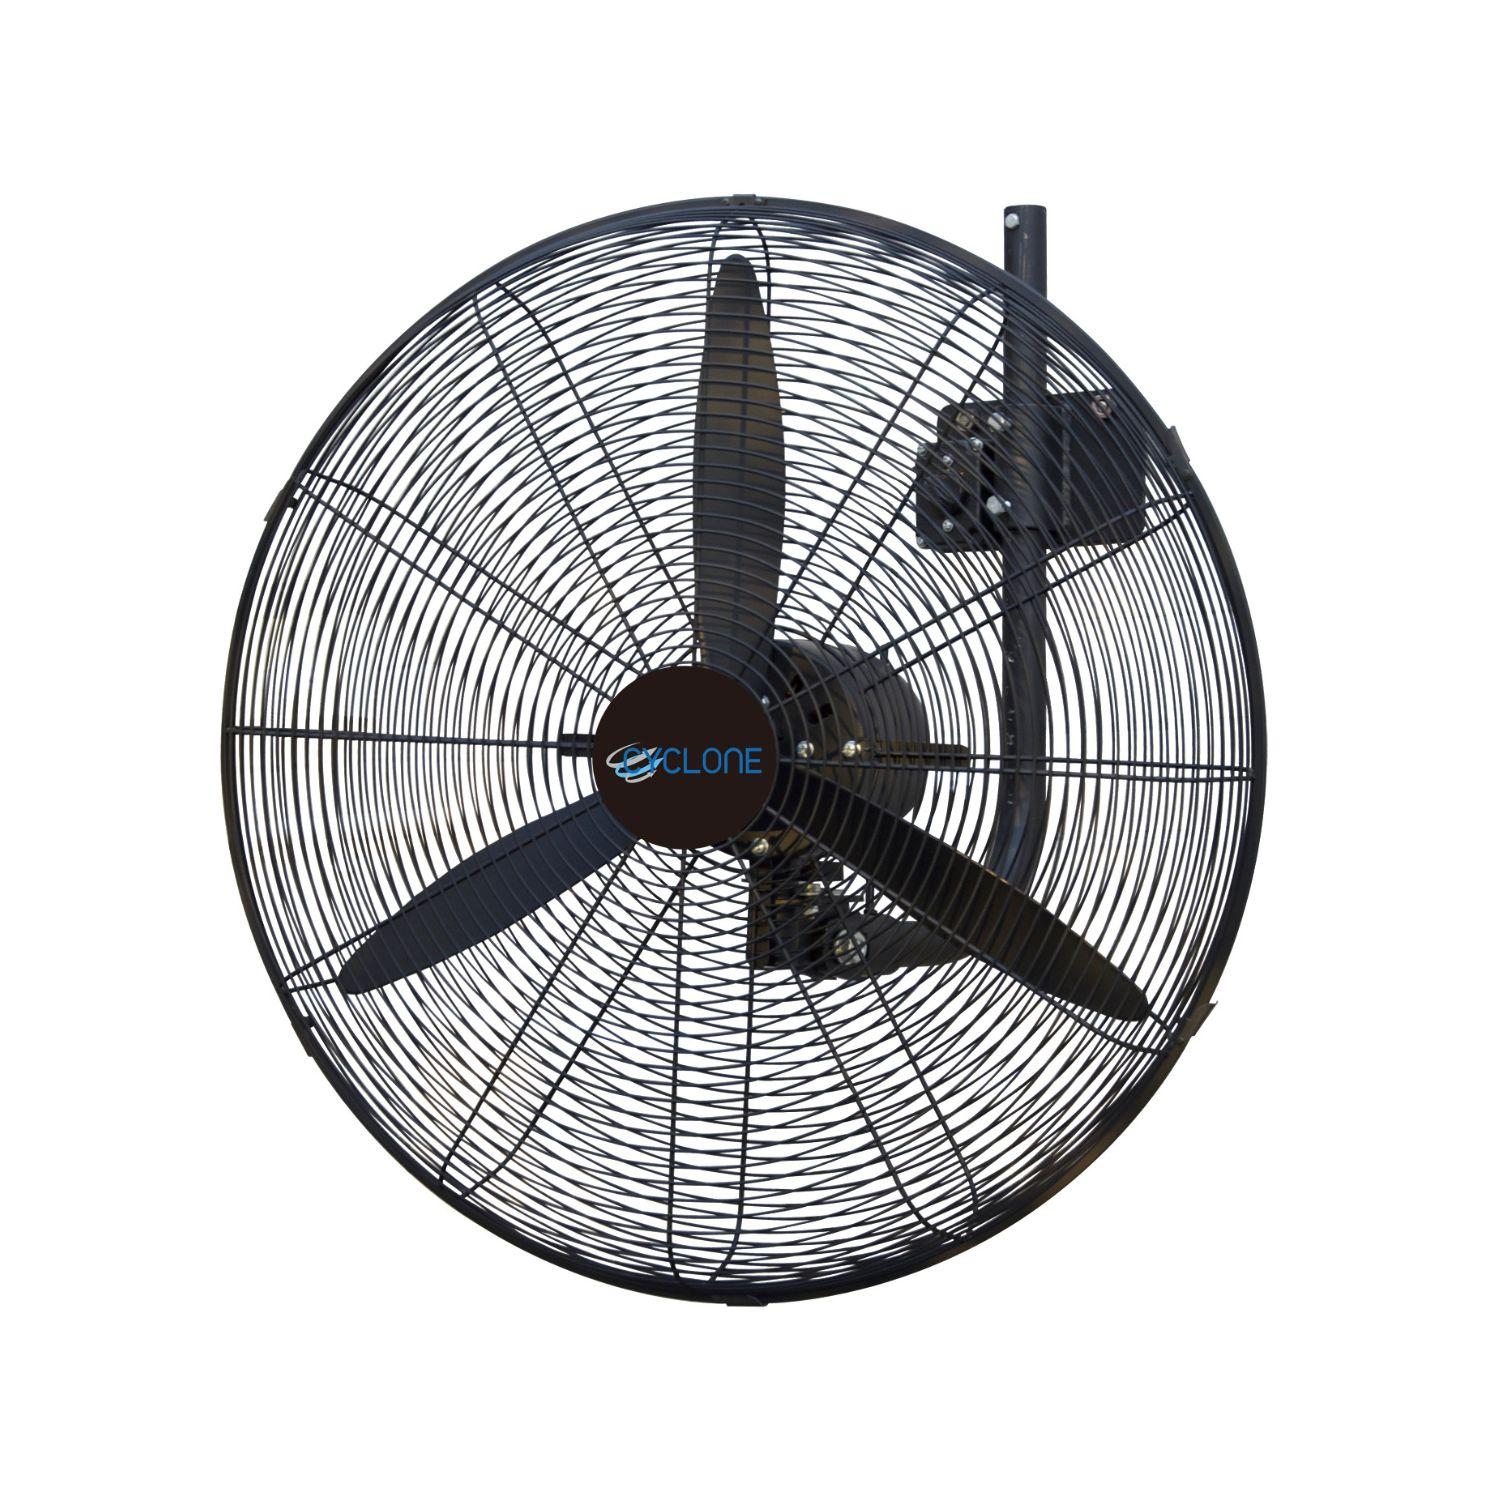 Cyclone 650TW 26 inch wall fan with remote 1